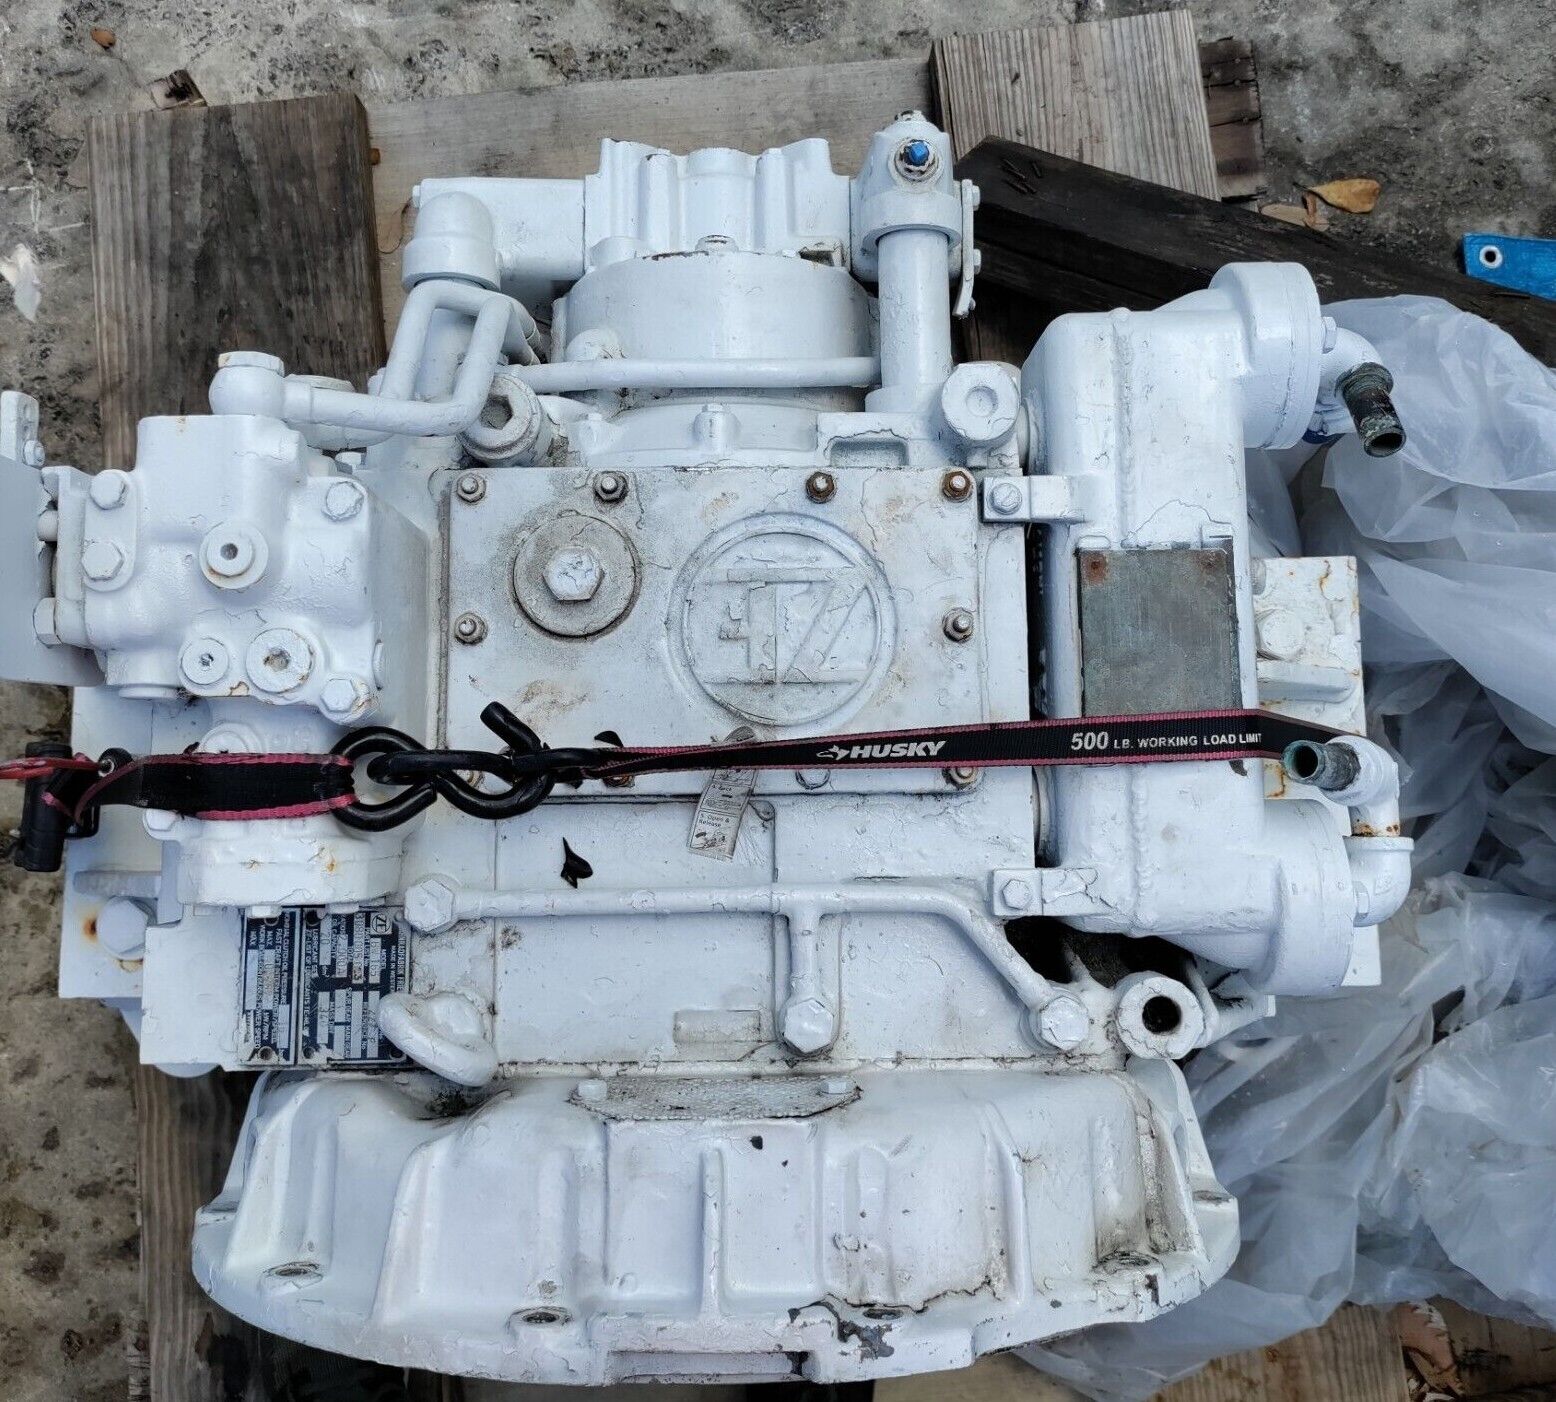 ZF MARINE BW165, 2.00 to 1 RATIO, TRANSMISSION / GEARBOX USED